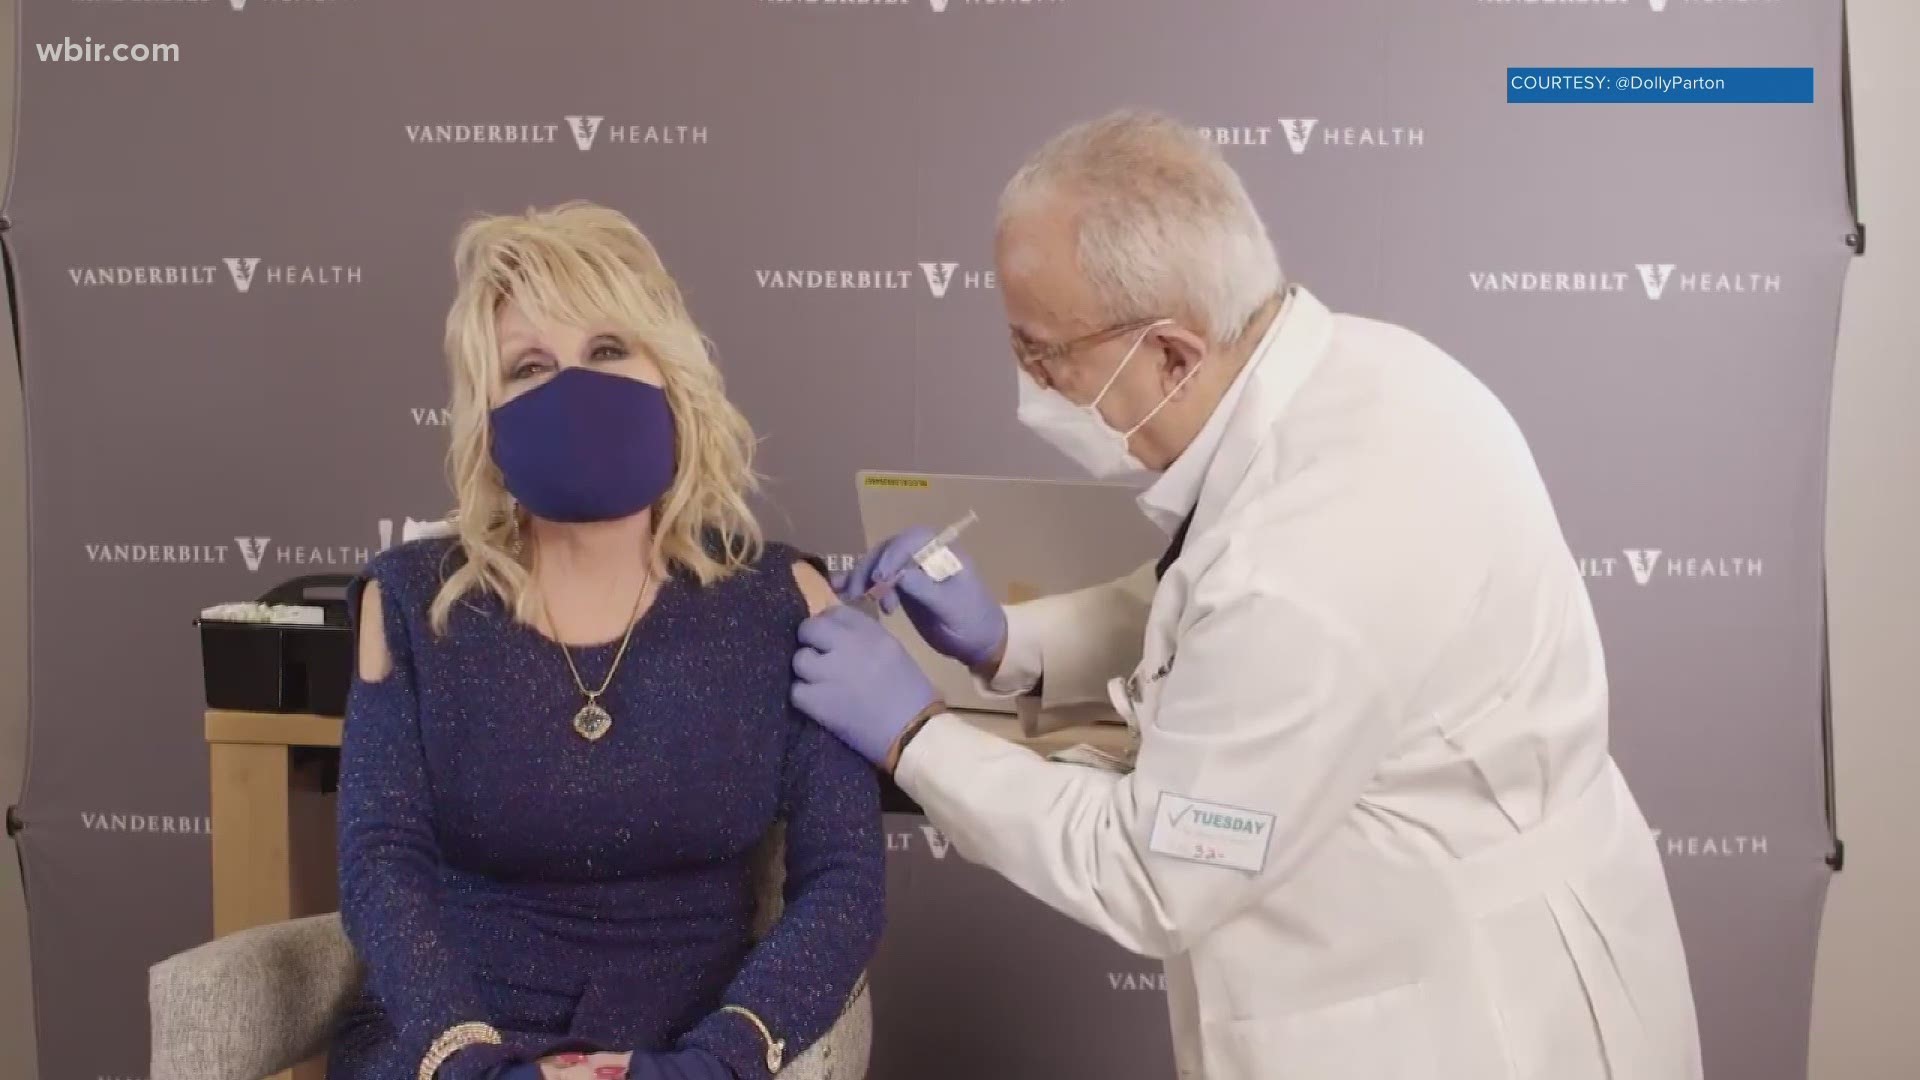 Dolly got her shot at Vanderbilt University Medical Center Tuesday and posted a video about it on her Twitter page.